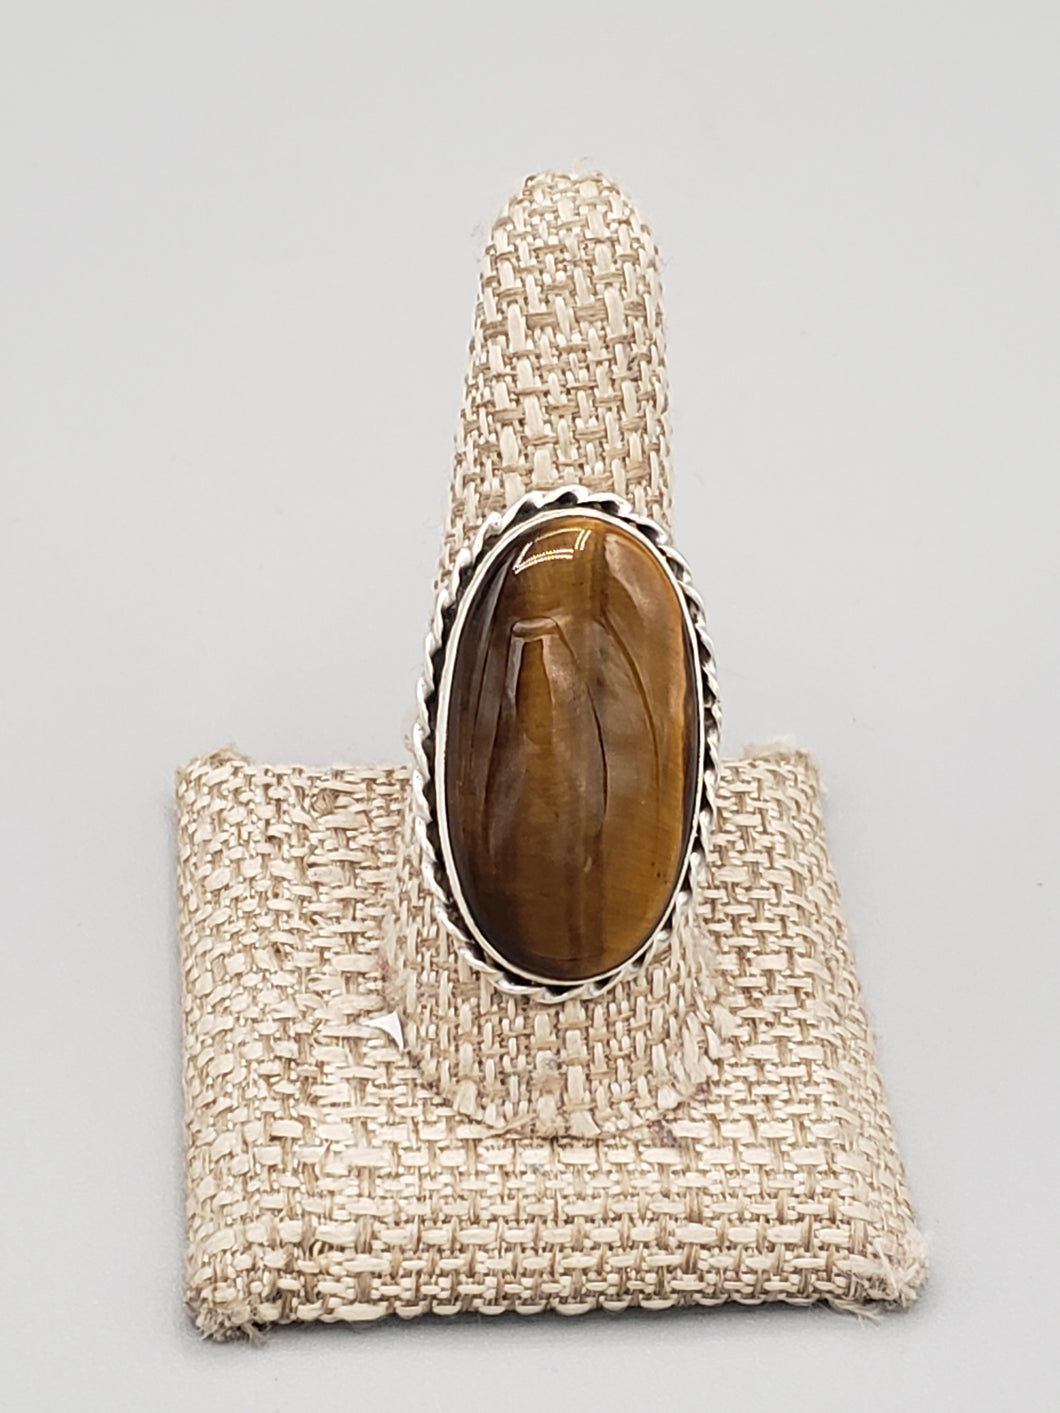 TIGER EYE RING - SIZE 10 - OVAL SHAPED